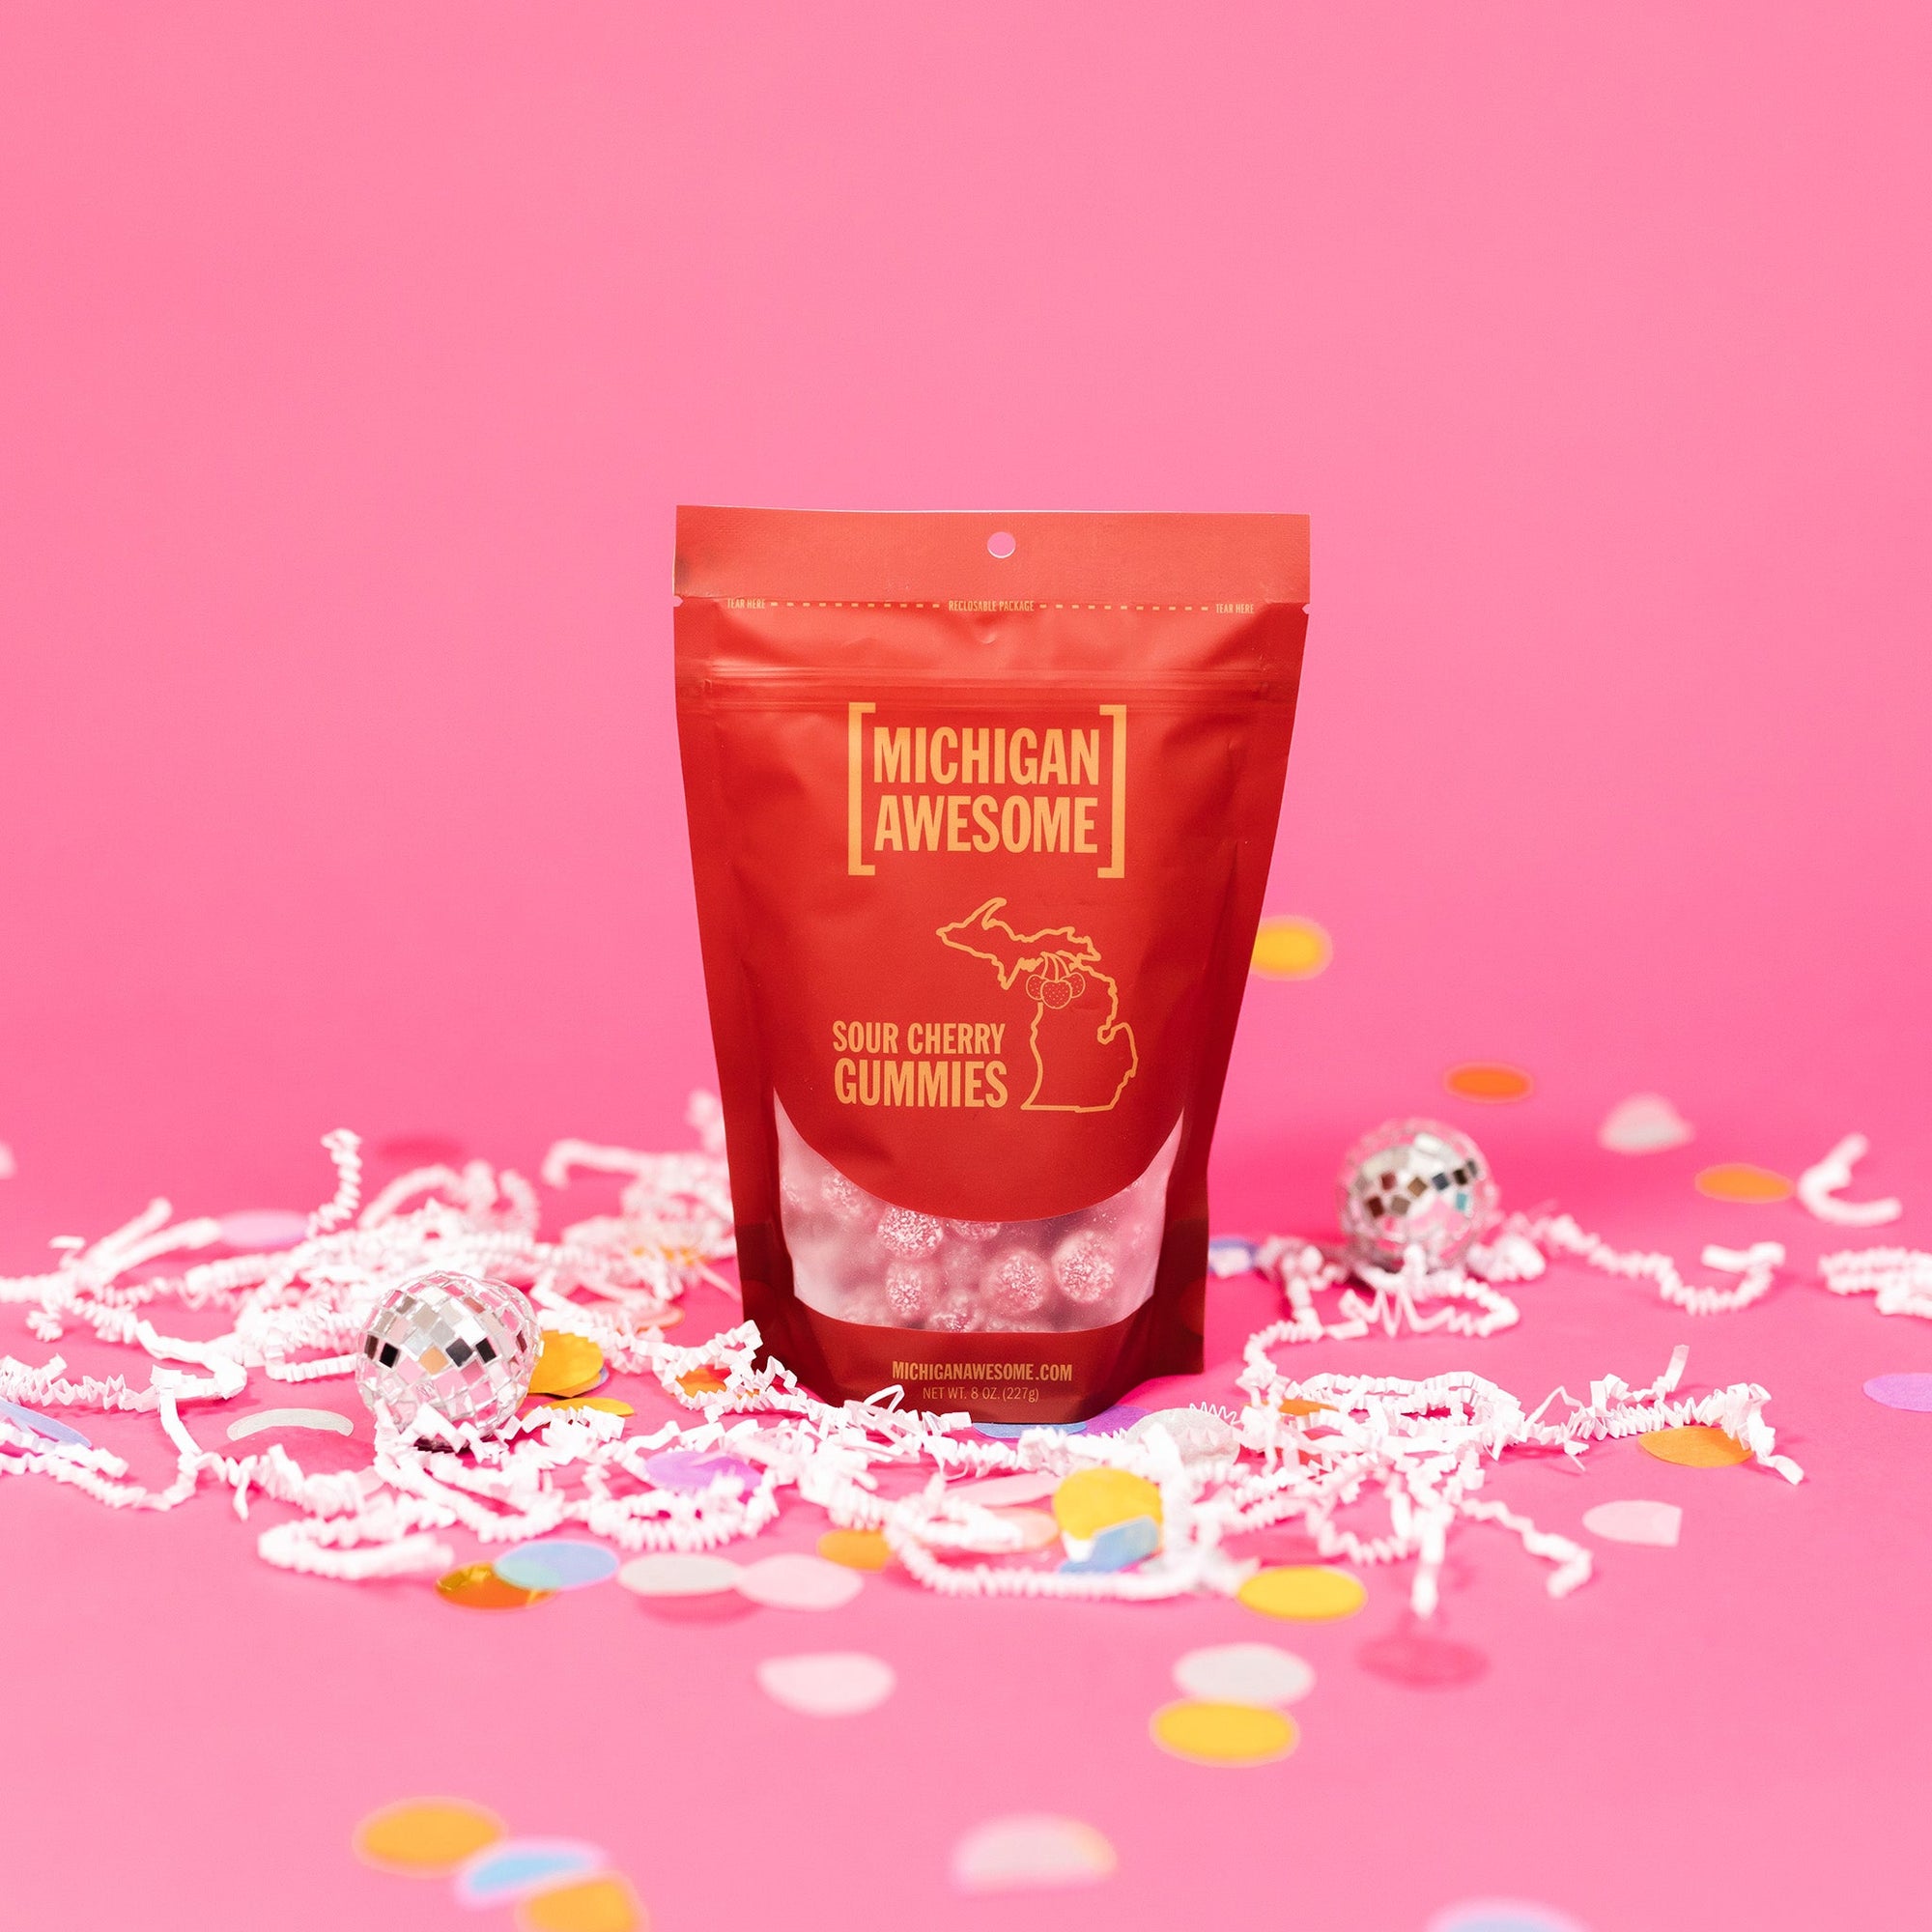 On a bubblegum pink background sits a bag with white crinkle and big, colorful confetti scattered around. There are mini disco balls. This red bag filled with sugar sour cherry gummies. It says "MICHIGAN AWESOME," and "SOUR CHERRY GUMMIES" in goldish-yellow, all caps block font. It has an outlined illustration of the state of Michigan-UP with cherries. There are sugar sour cherry gummies sitting around the bag.